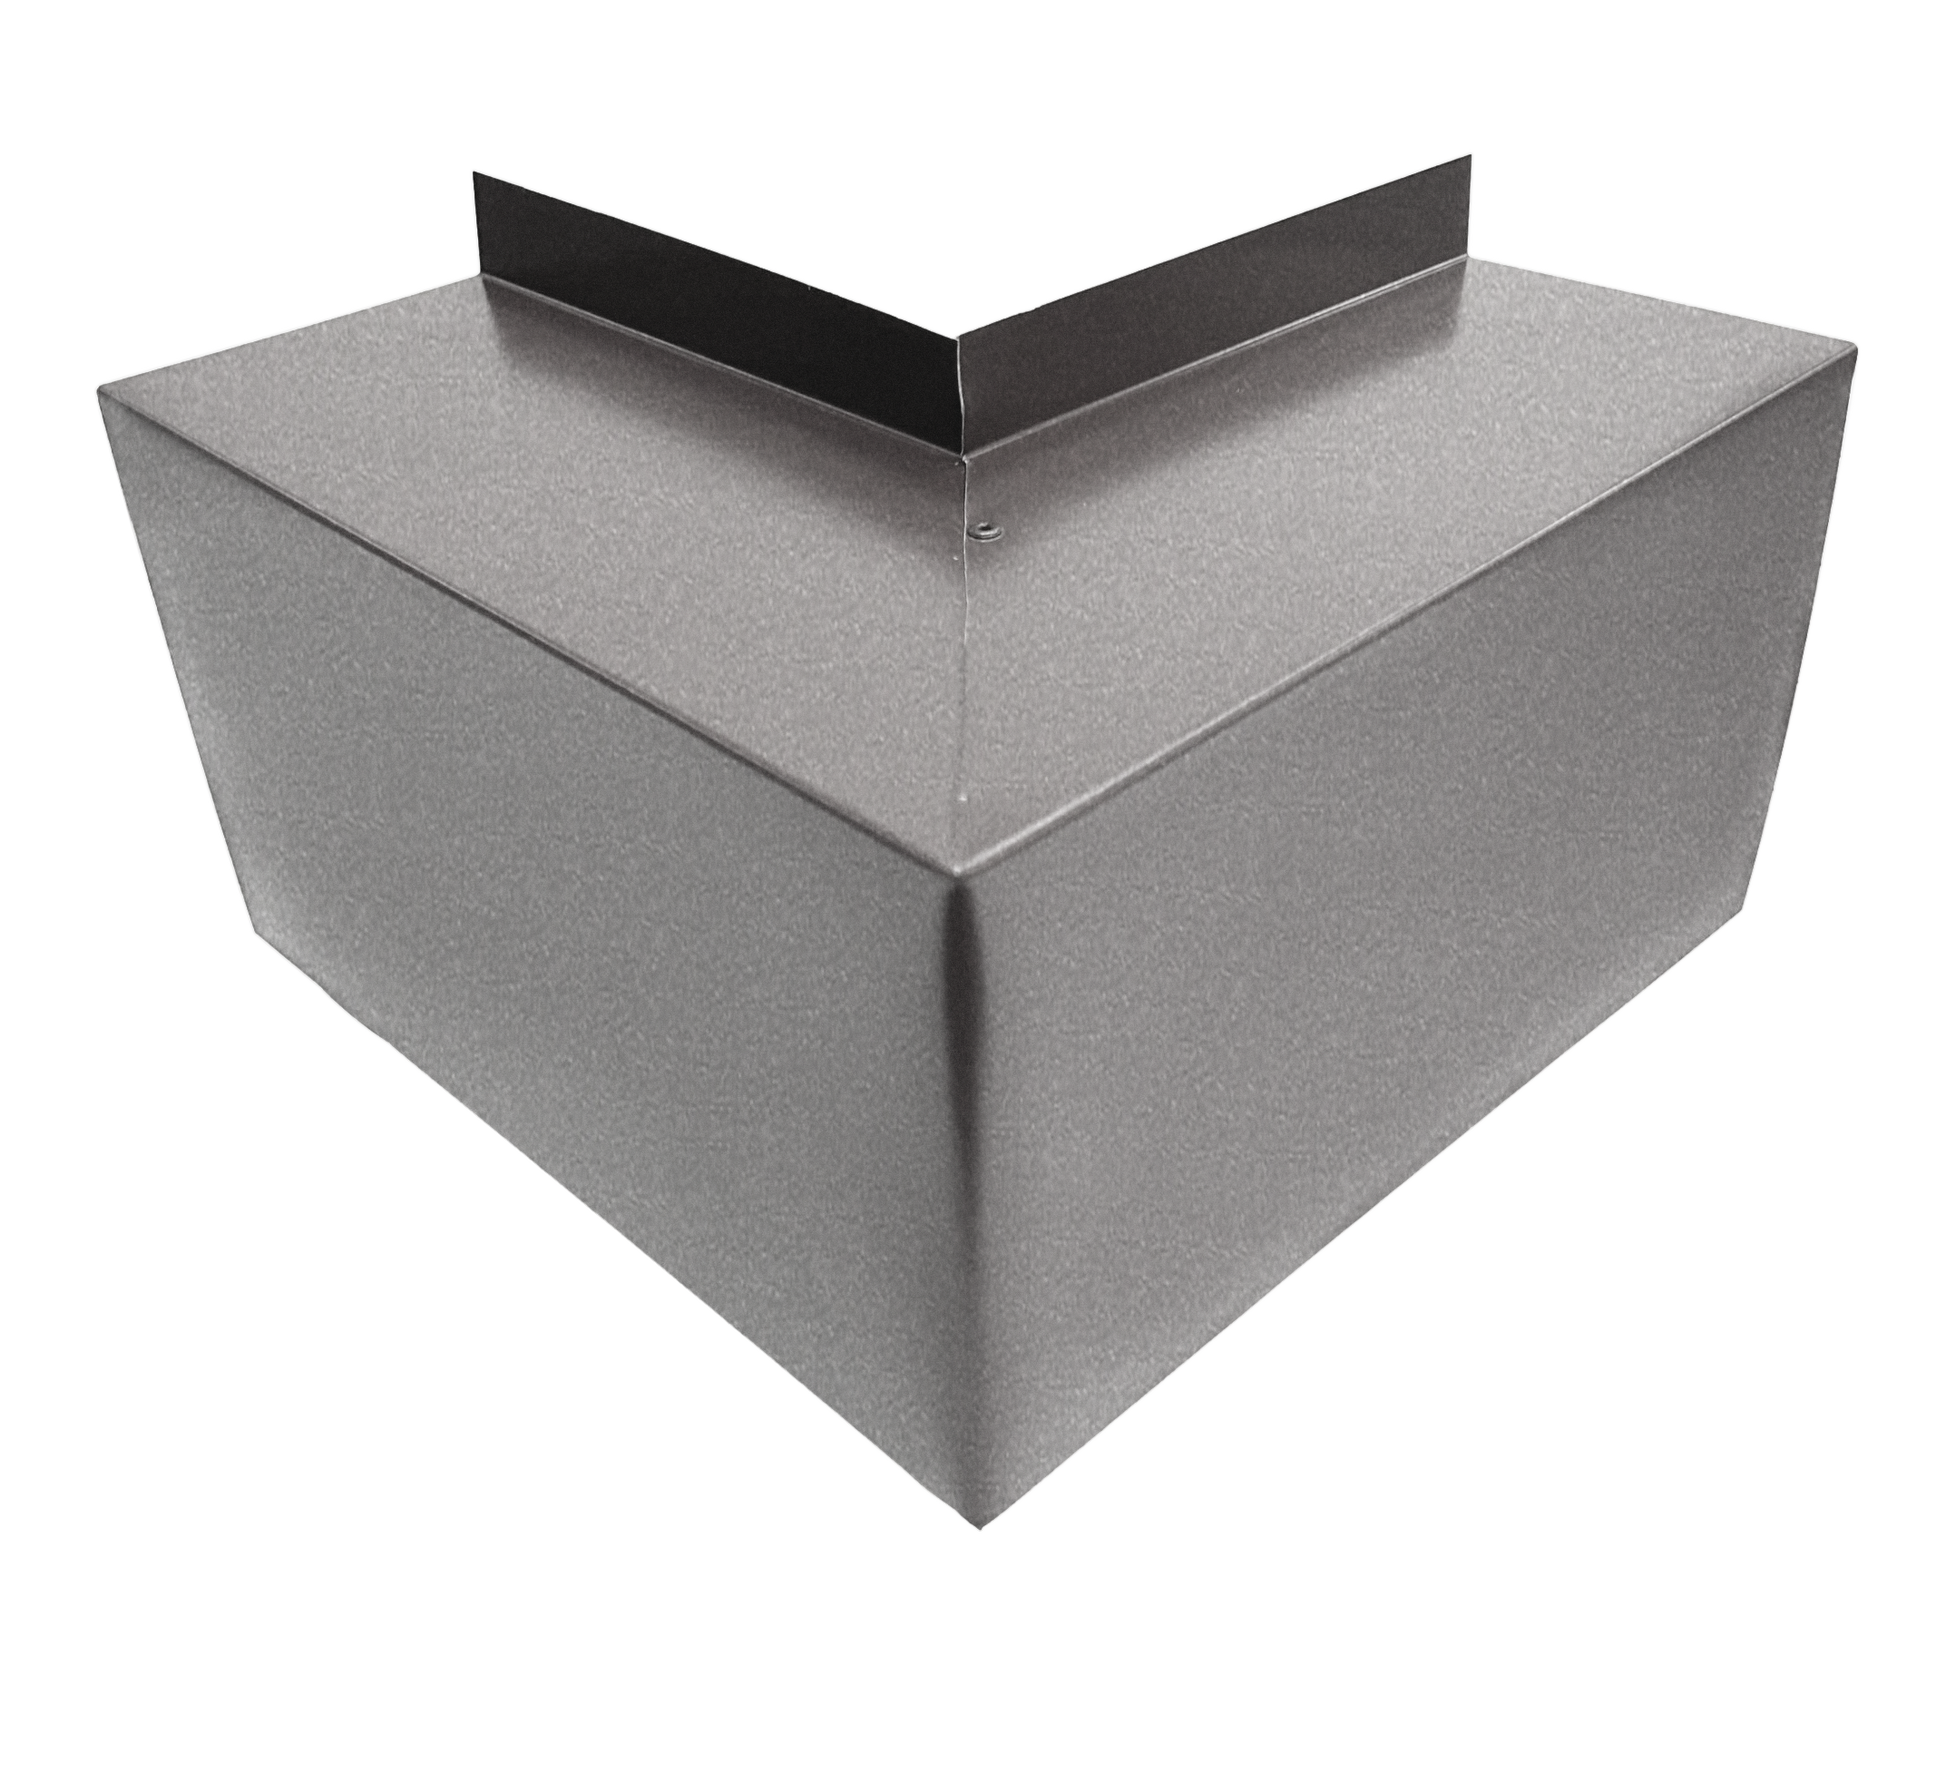 A gray metal box with a triangular, pointed base and a flat top, featuring a vertical seam along the middle. Made from durable 24 gauge steel elbows, the top edges have additional angled metal flaps extending upwards for easy installation. The background is white. This is the Perma Cover Commercial Series - 24 Gauge Line Set Cover Outside Corner Elbows - Premium Quality.